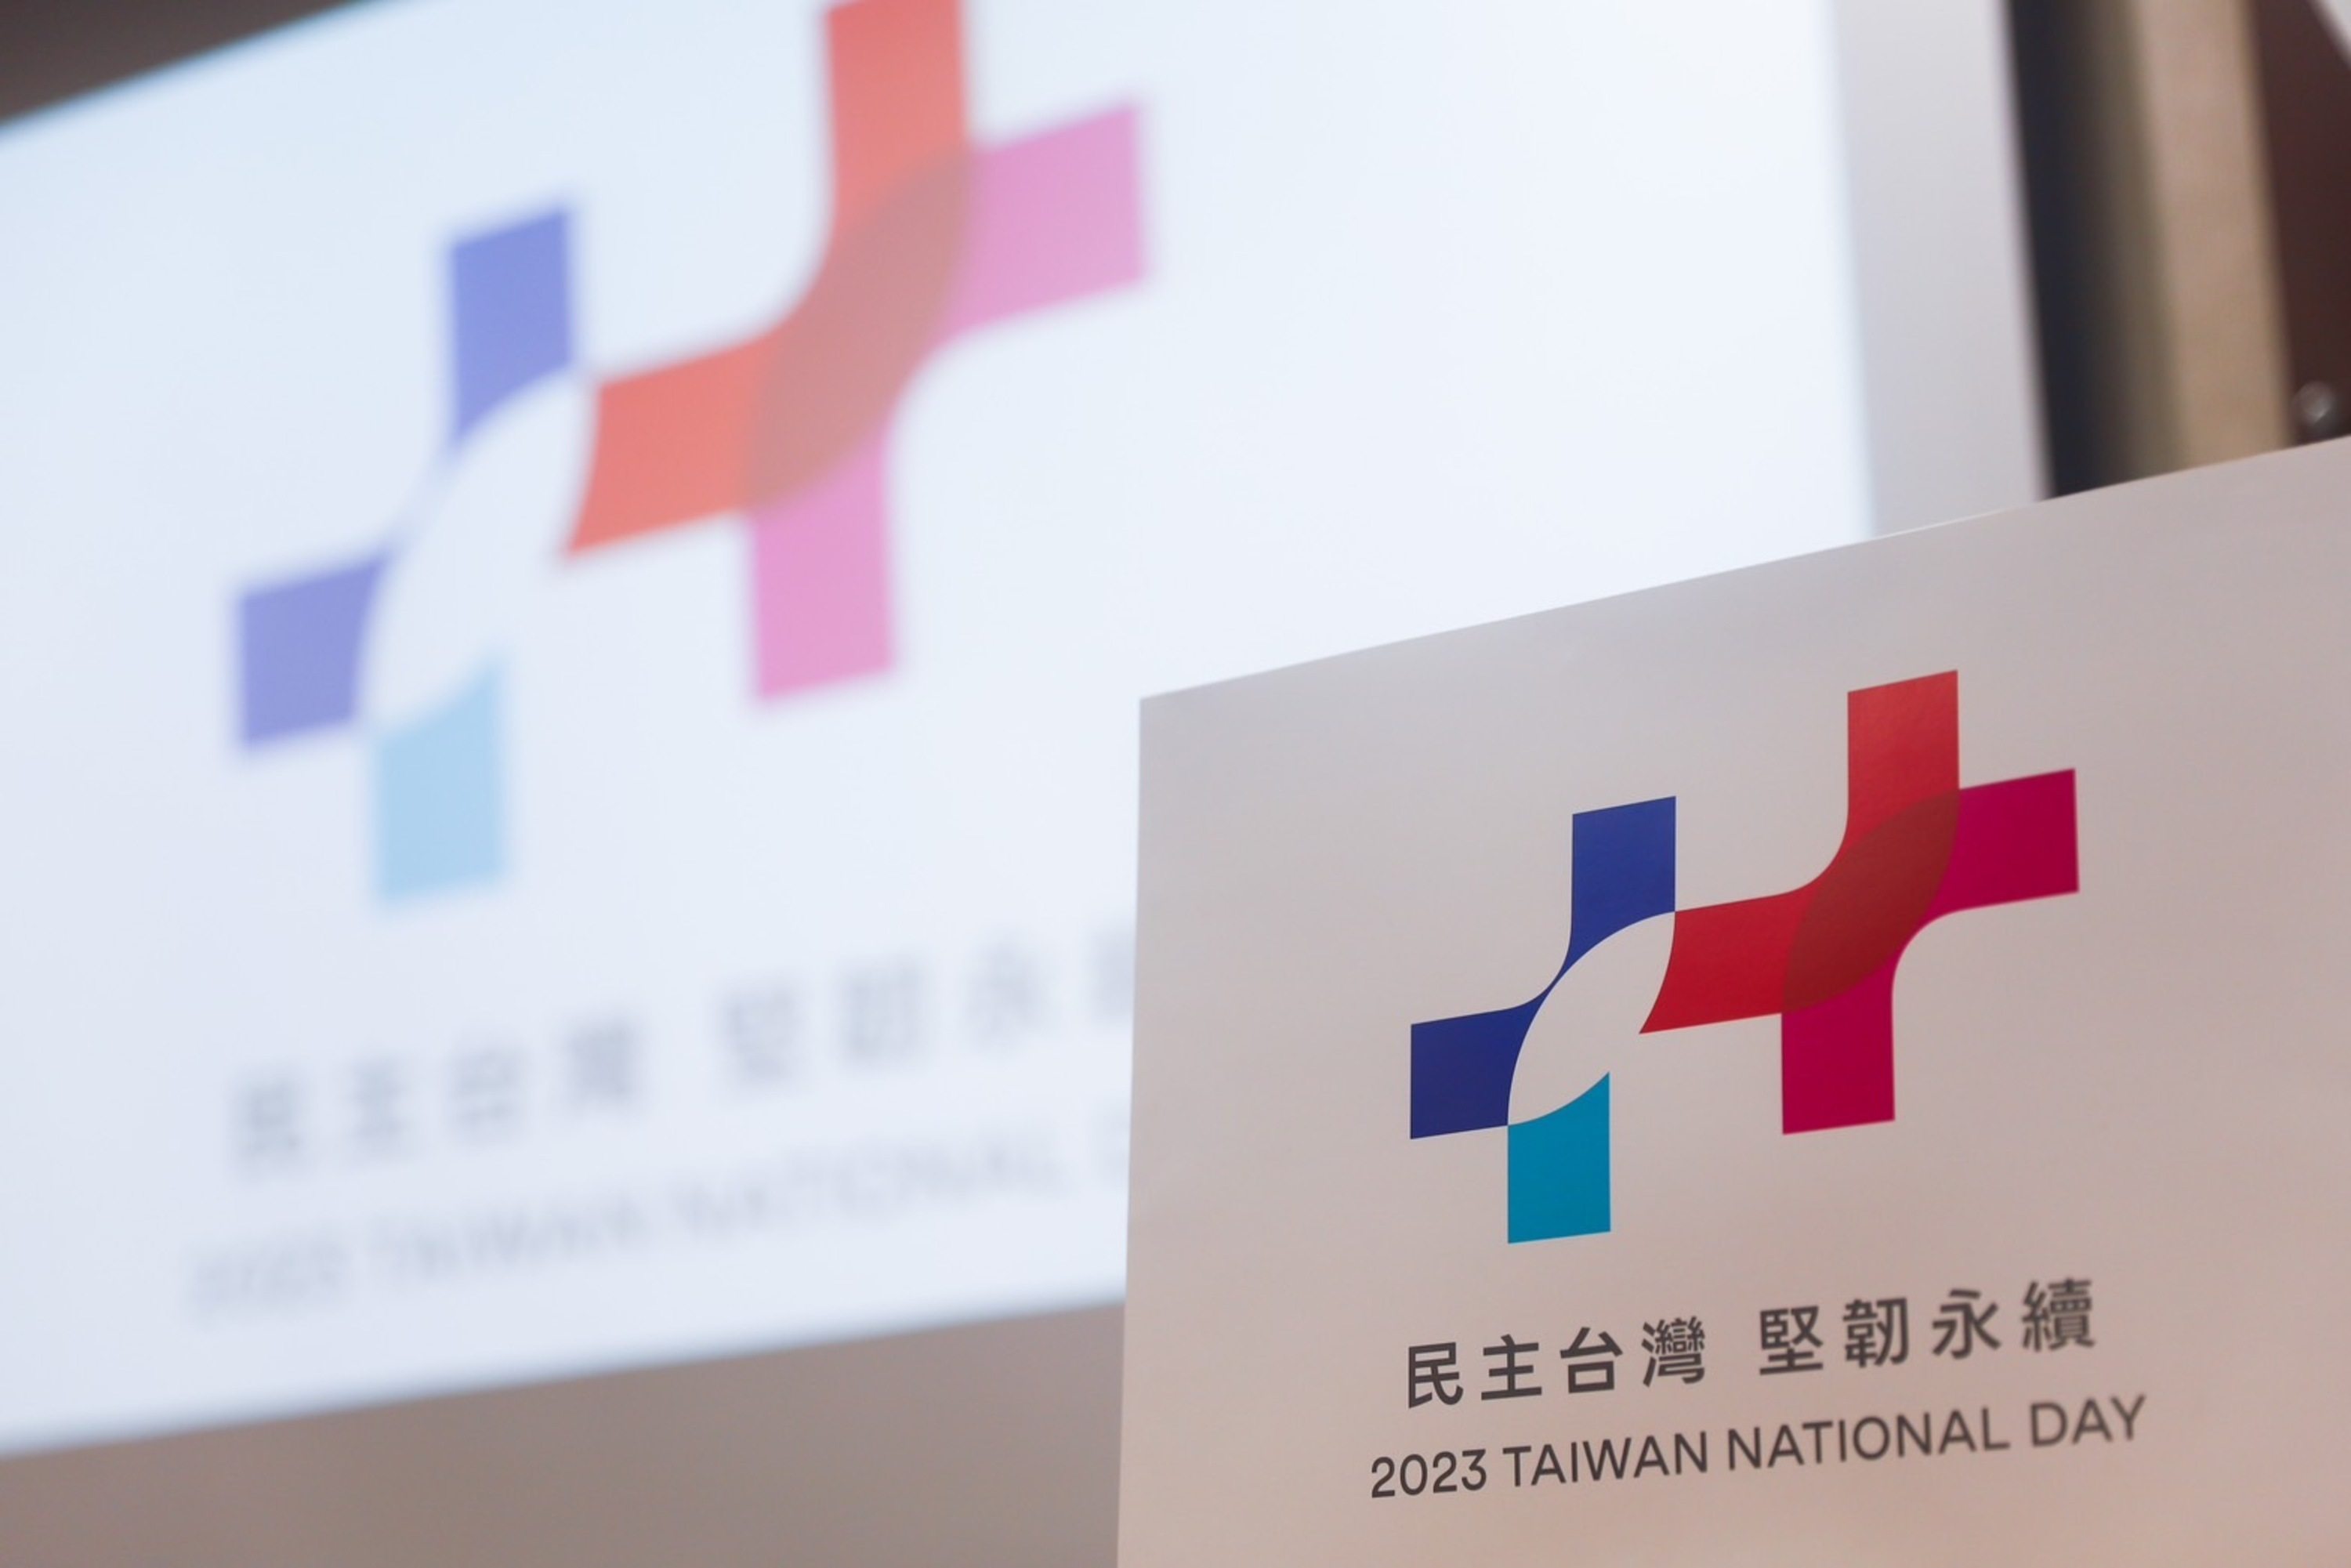 This year’s logo for the Double Tenth holiday has sparked controversy. Photo: CNA